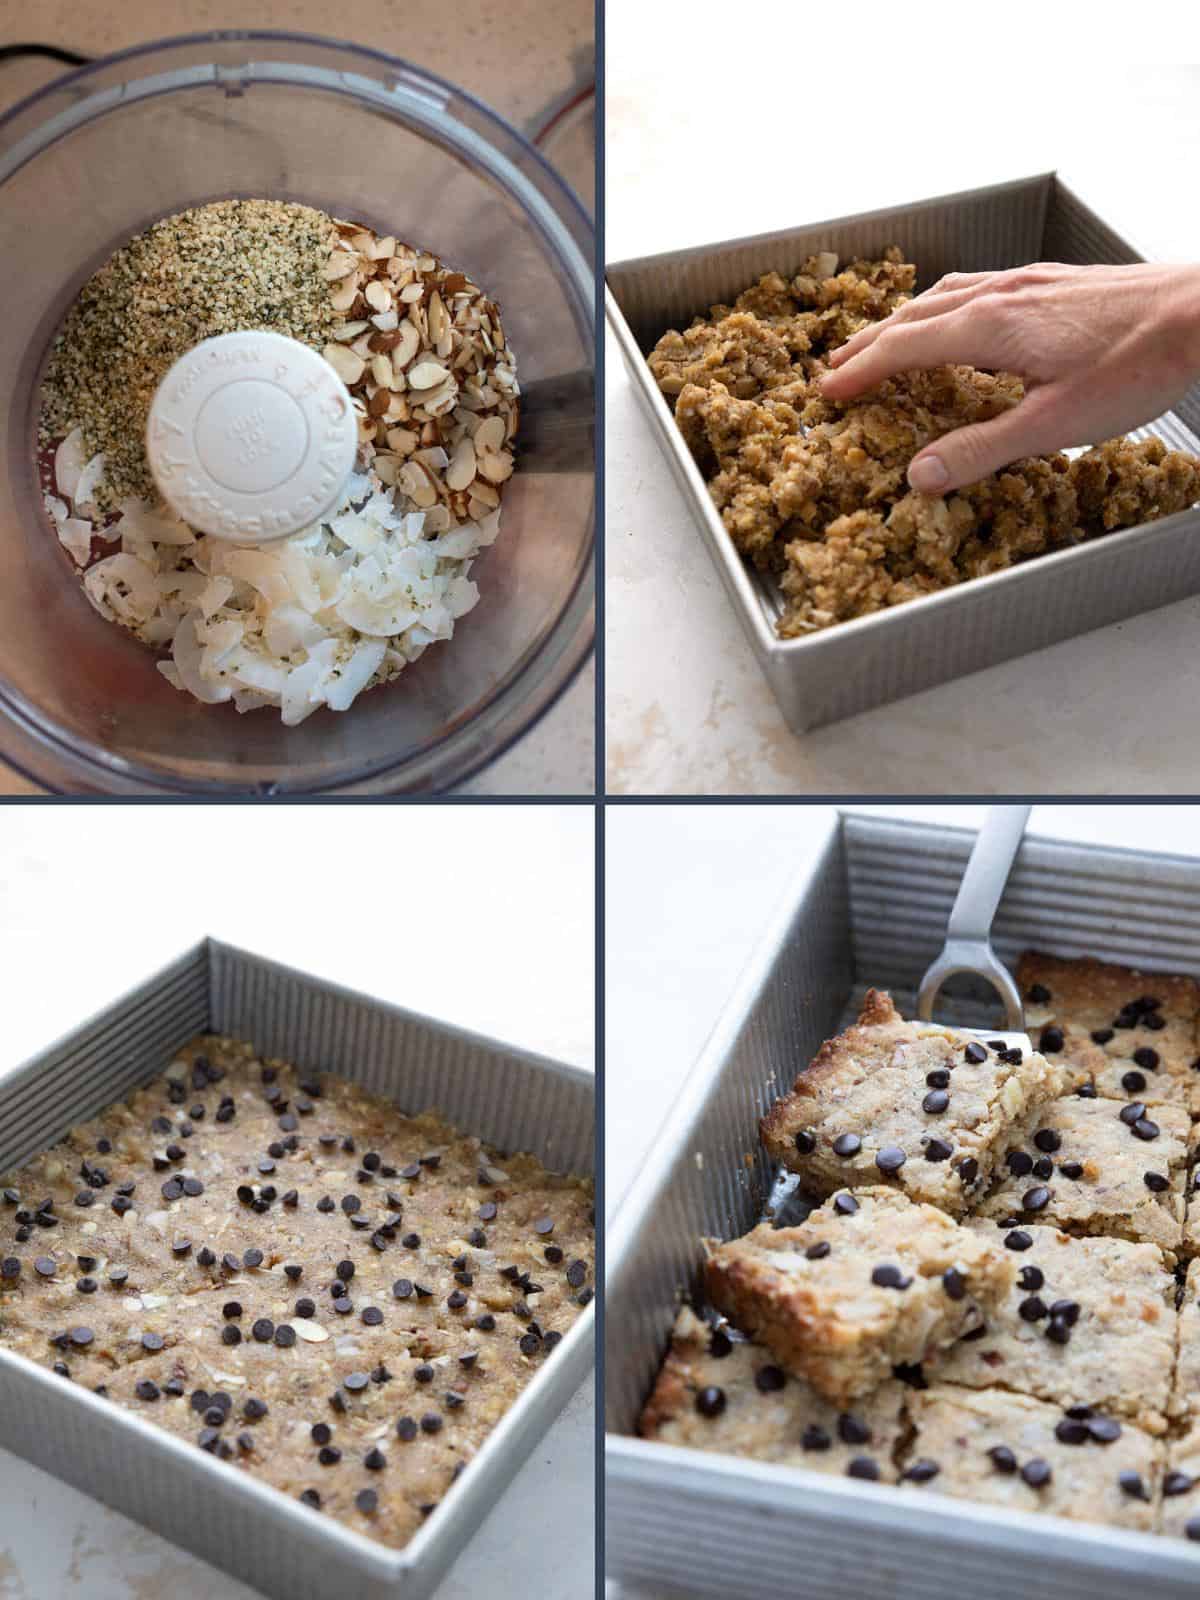 A collage of 4 images showing the steps for making keto breakfast bars.